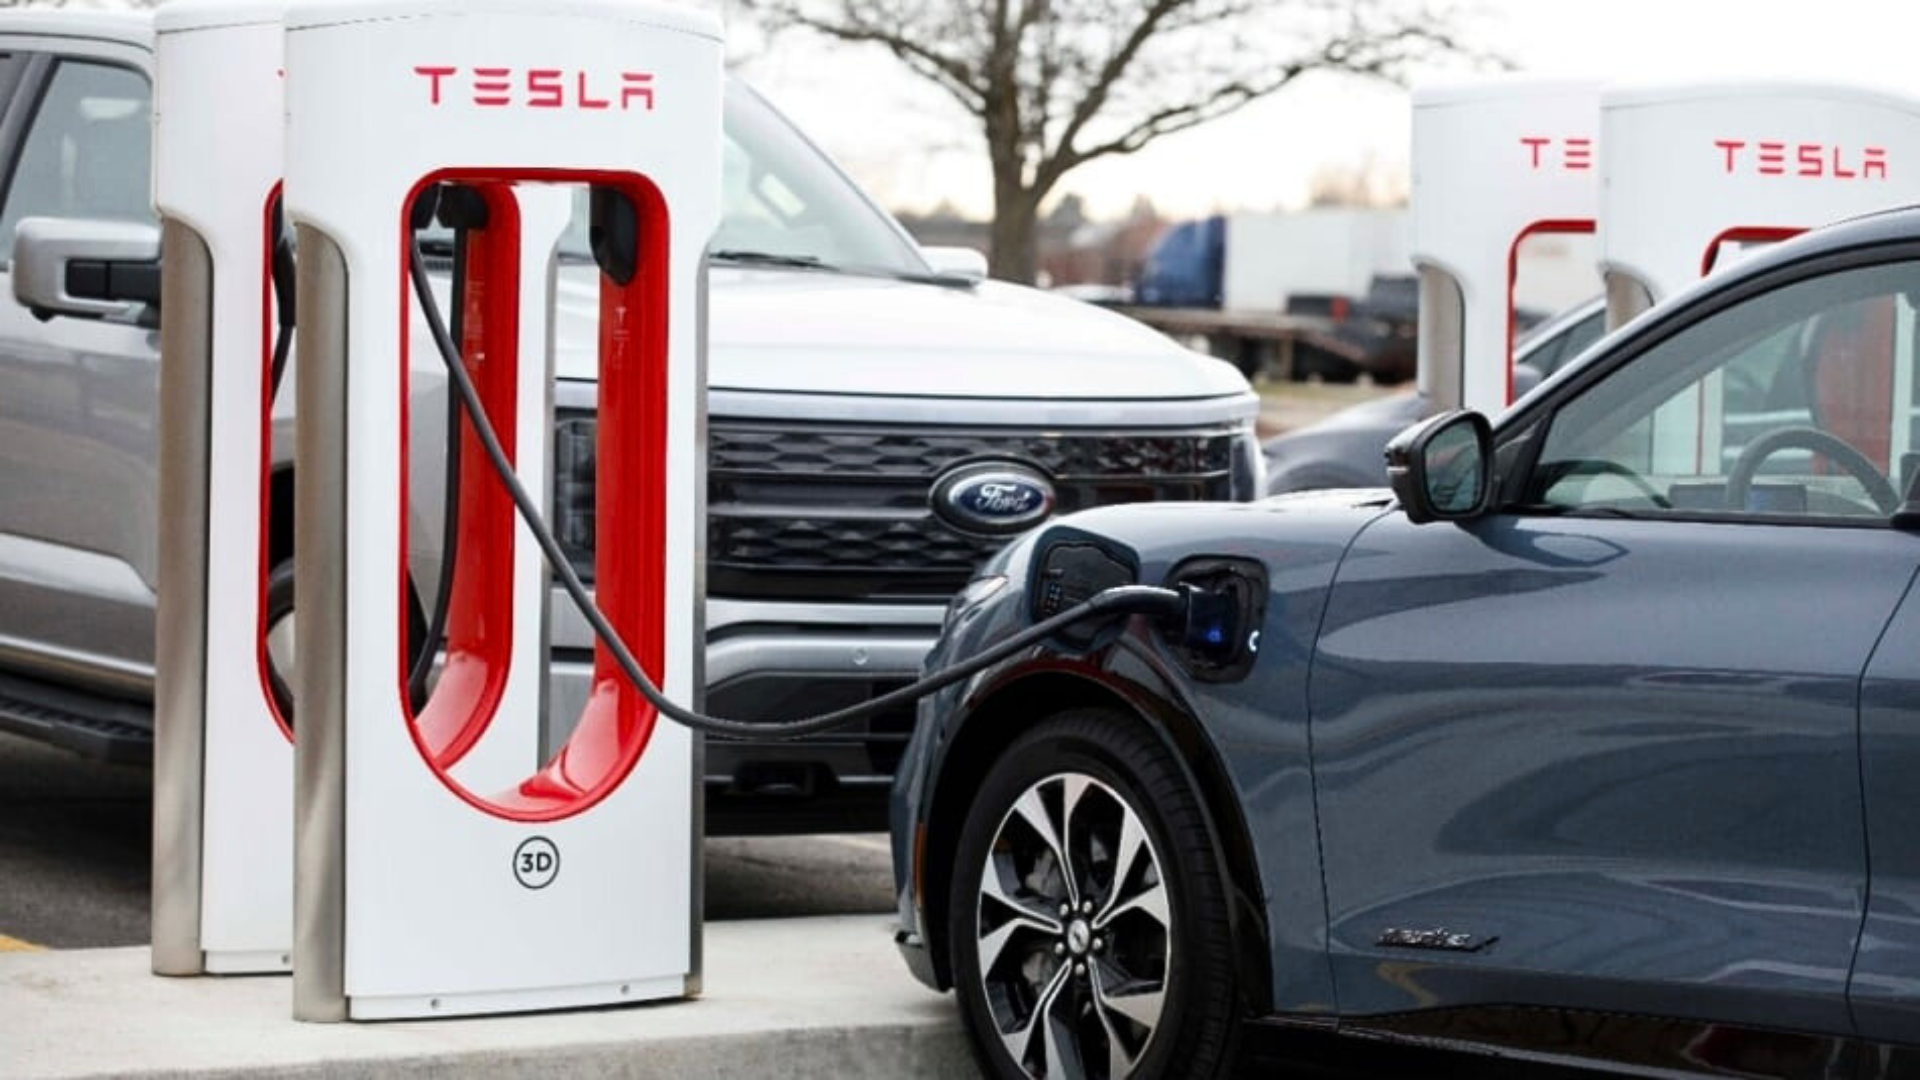 Owners of Ford electric vehicles can reserve a complimentary Tesla Supercharger Adapter at no cost.